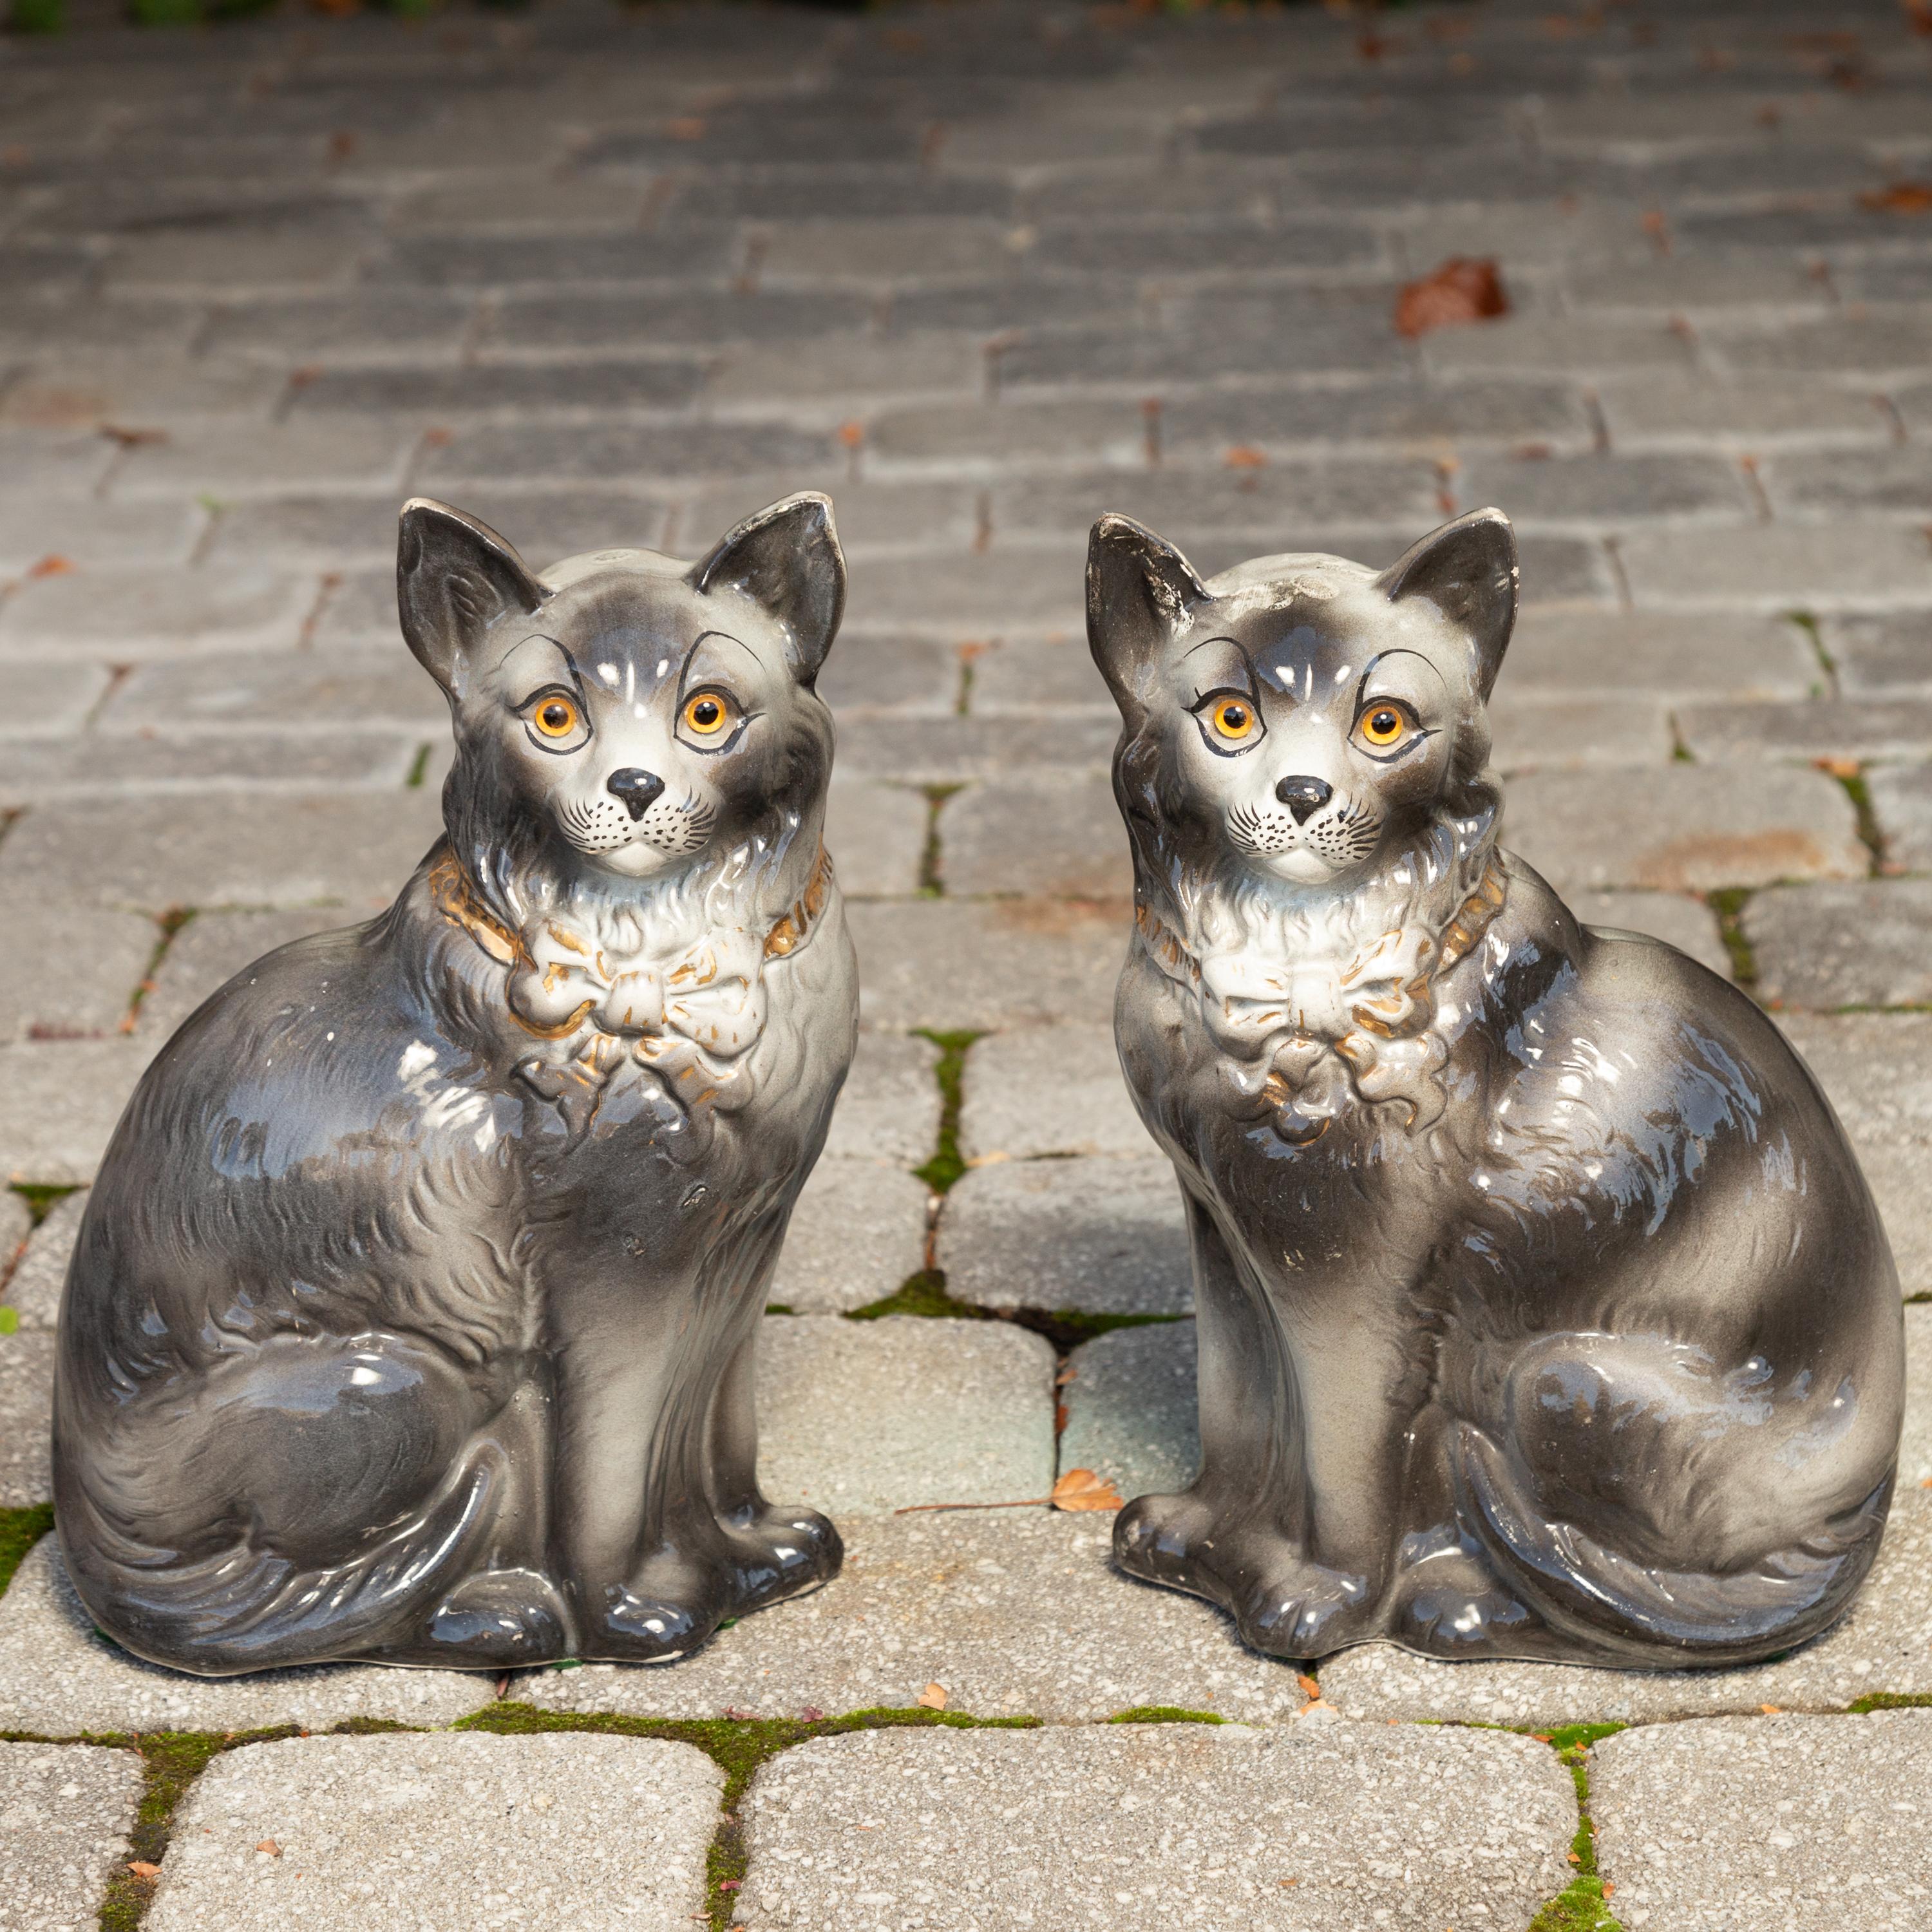 A pair of English Staffordshire cats from the late 19th century with grey coats and ribbons. Born in England during the laters years of Queen Victoria's long reign, this pair of Staffordshire sculptures features two grey-coated cats wearing delicate